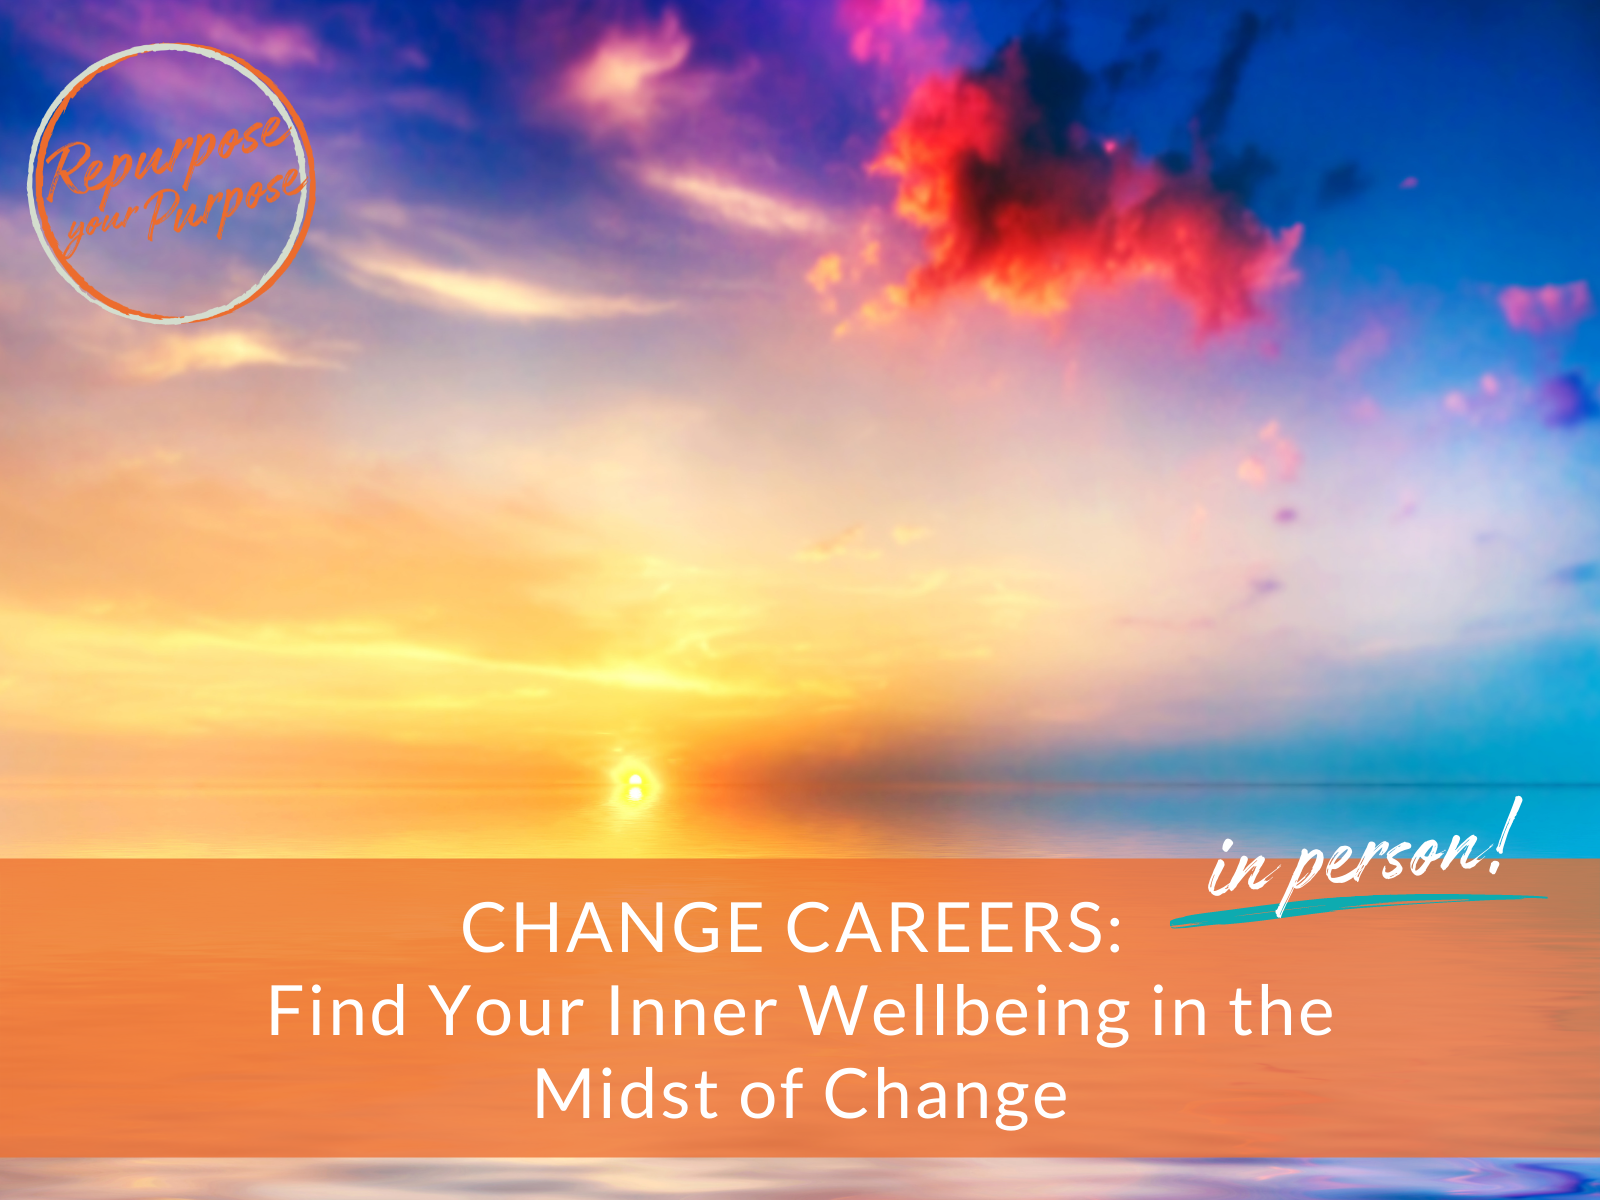 CHANGE CAREERS: Find Your Inner Wellbeing in the Midst of Change